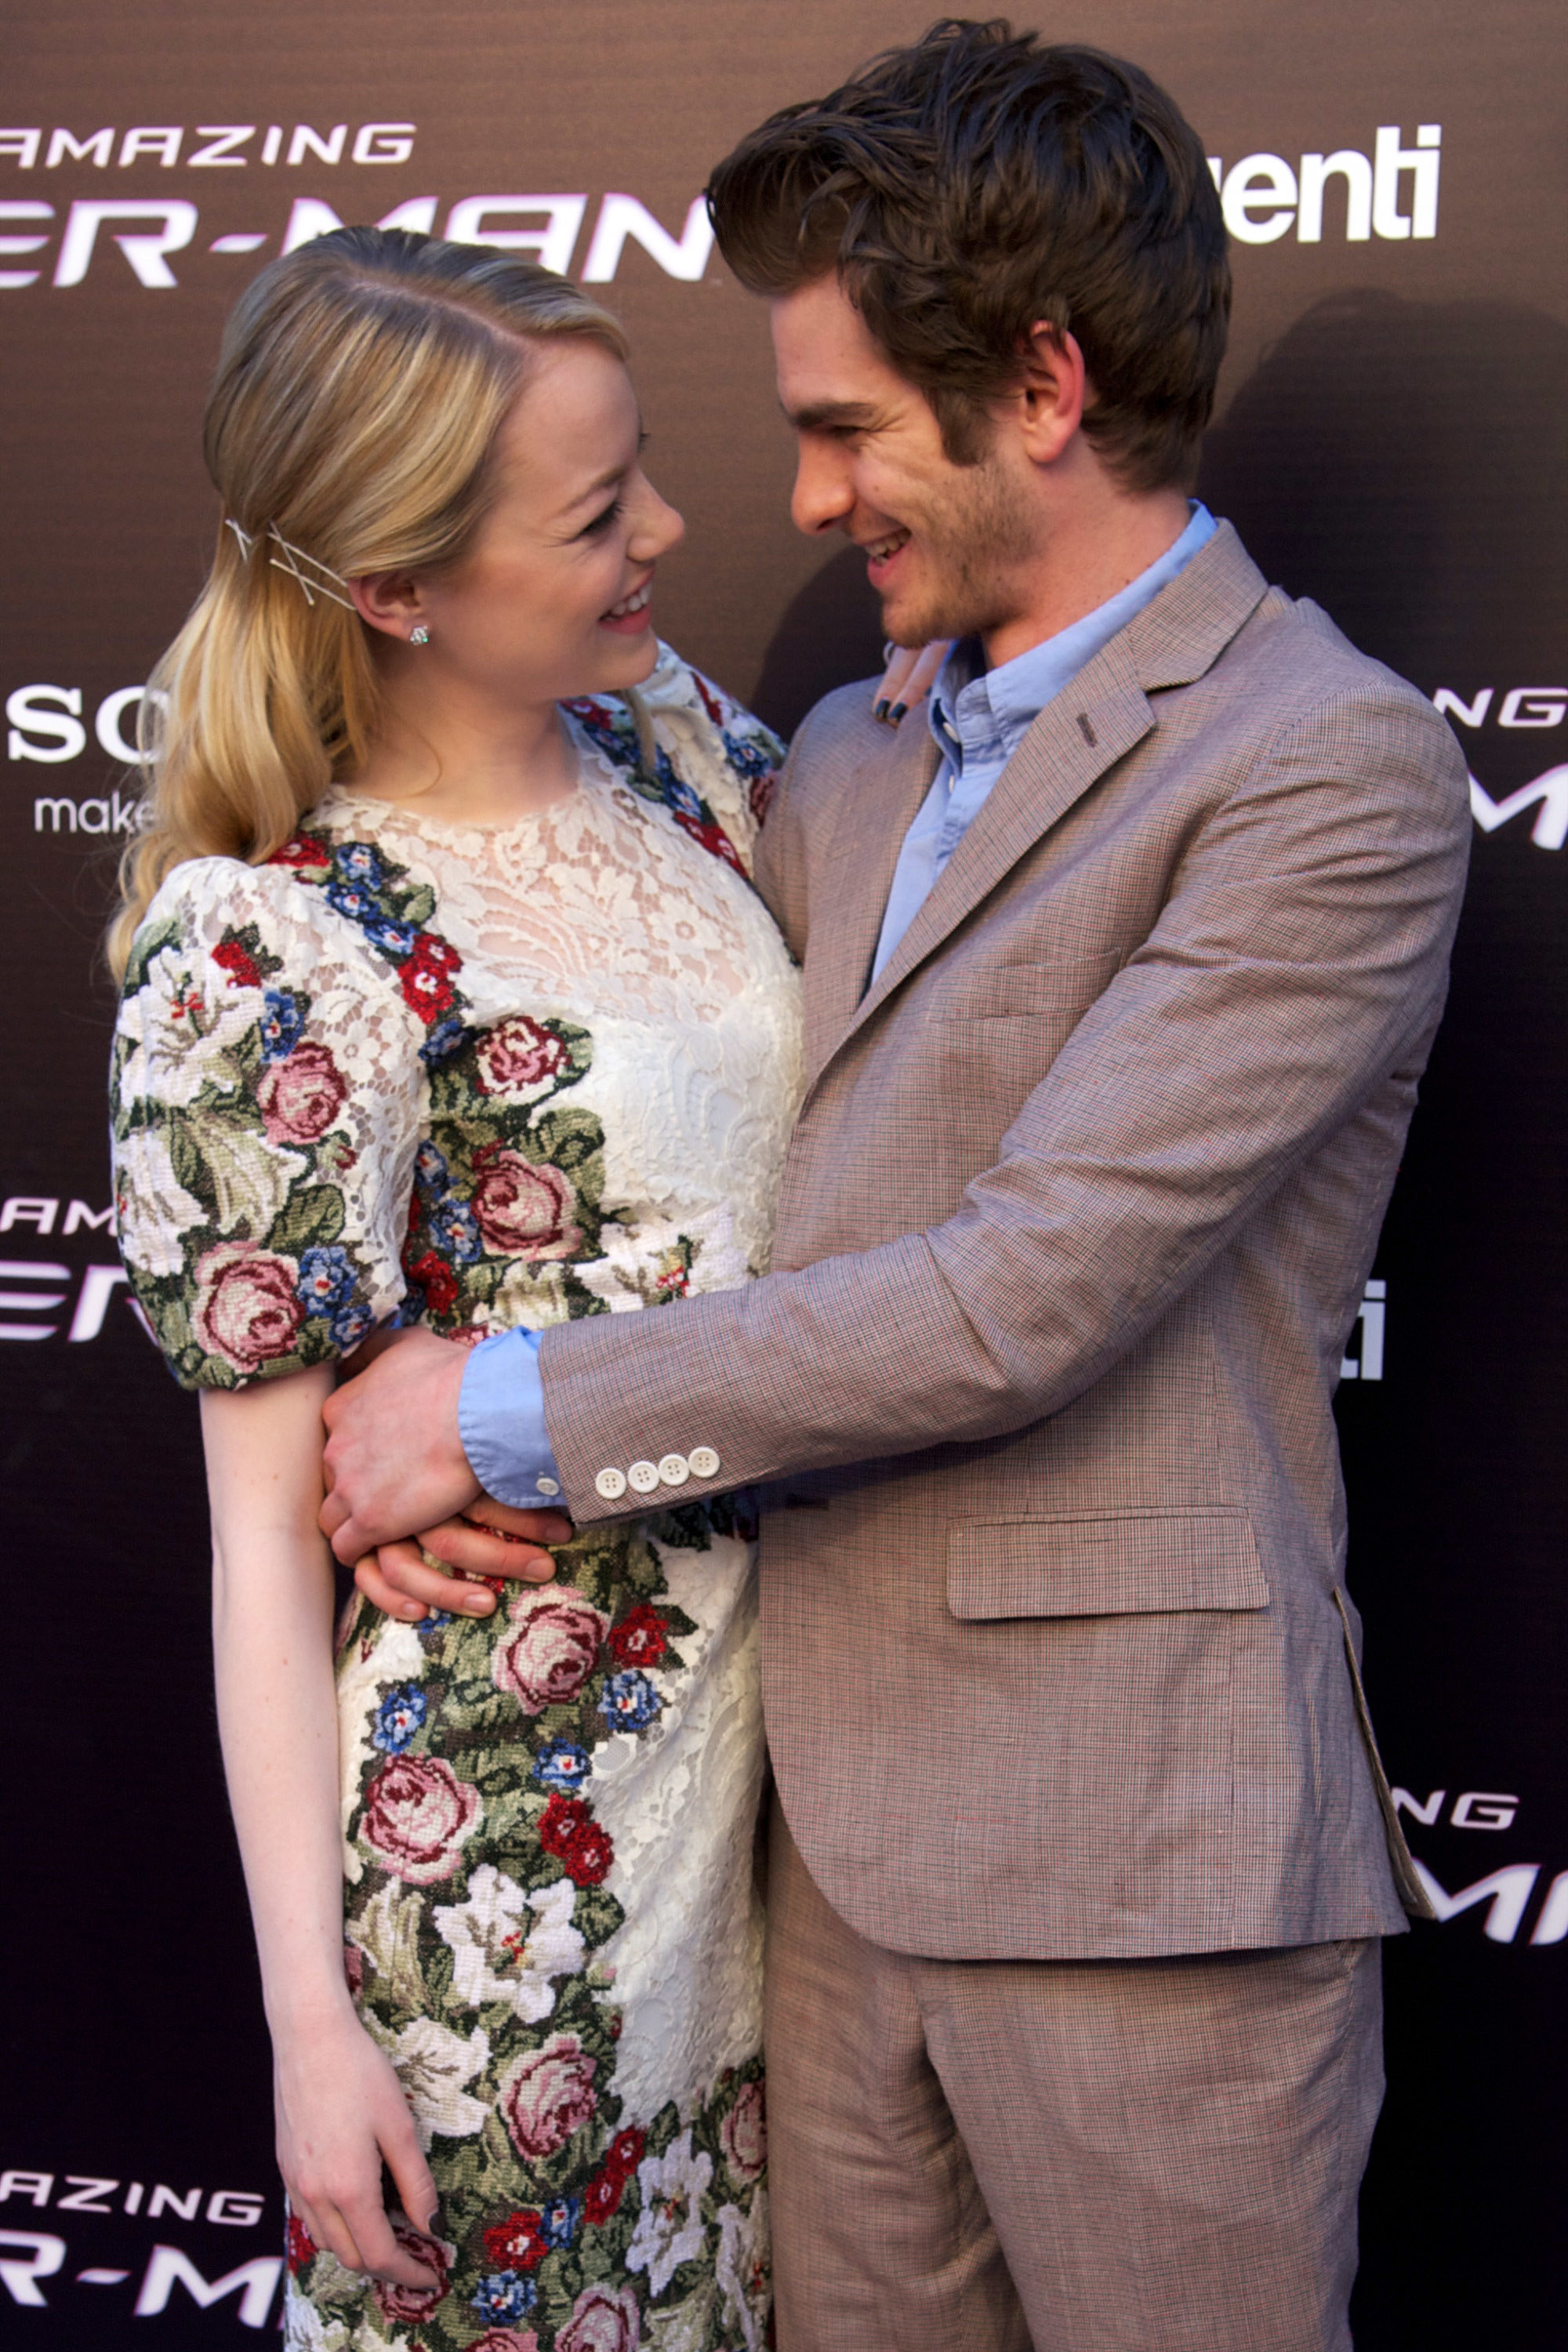 Emma Stone and Andrew Garfield with their arms around each other and smiling